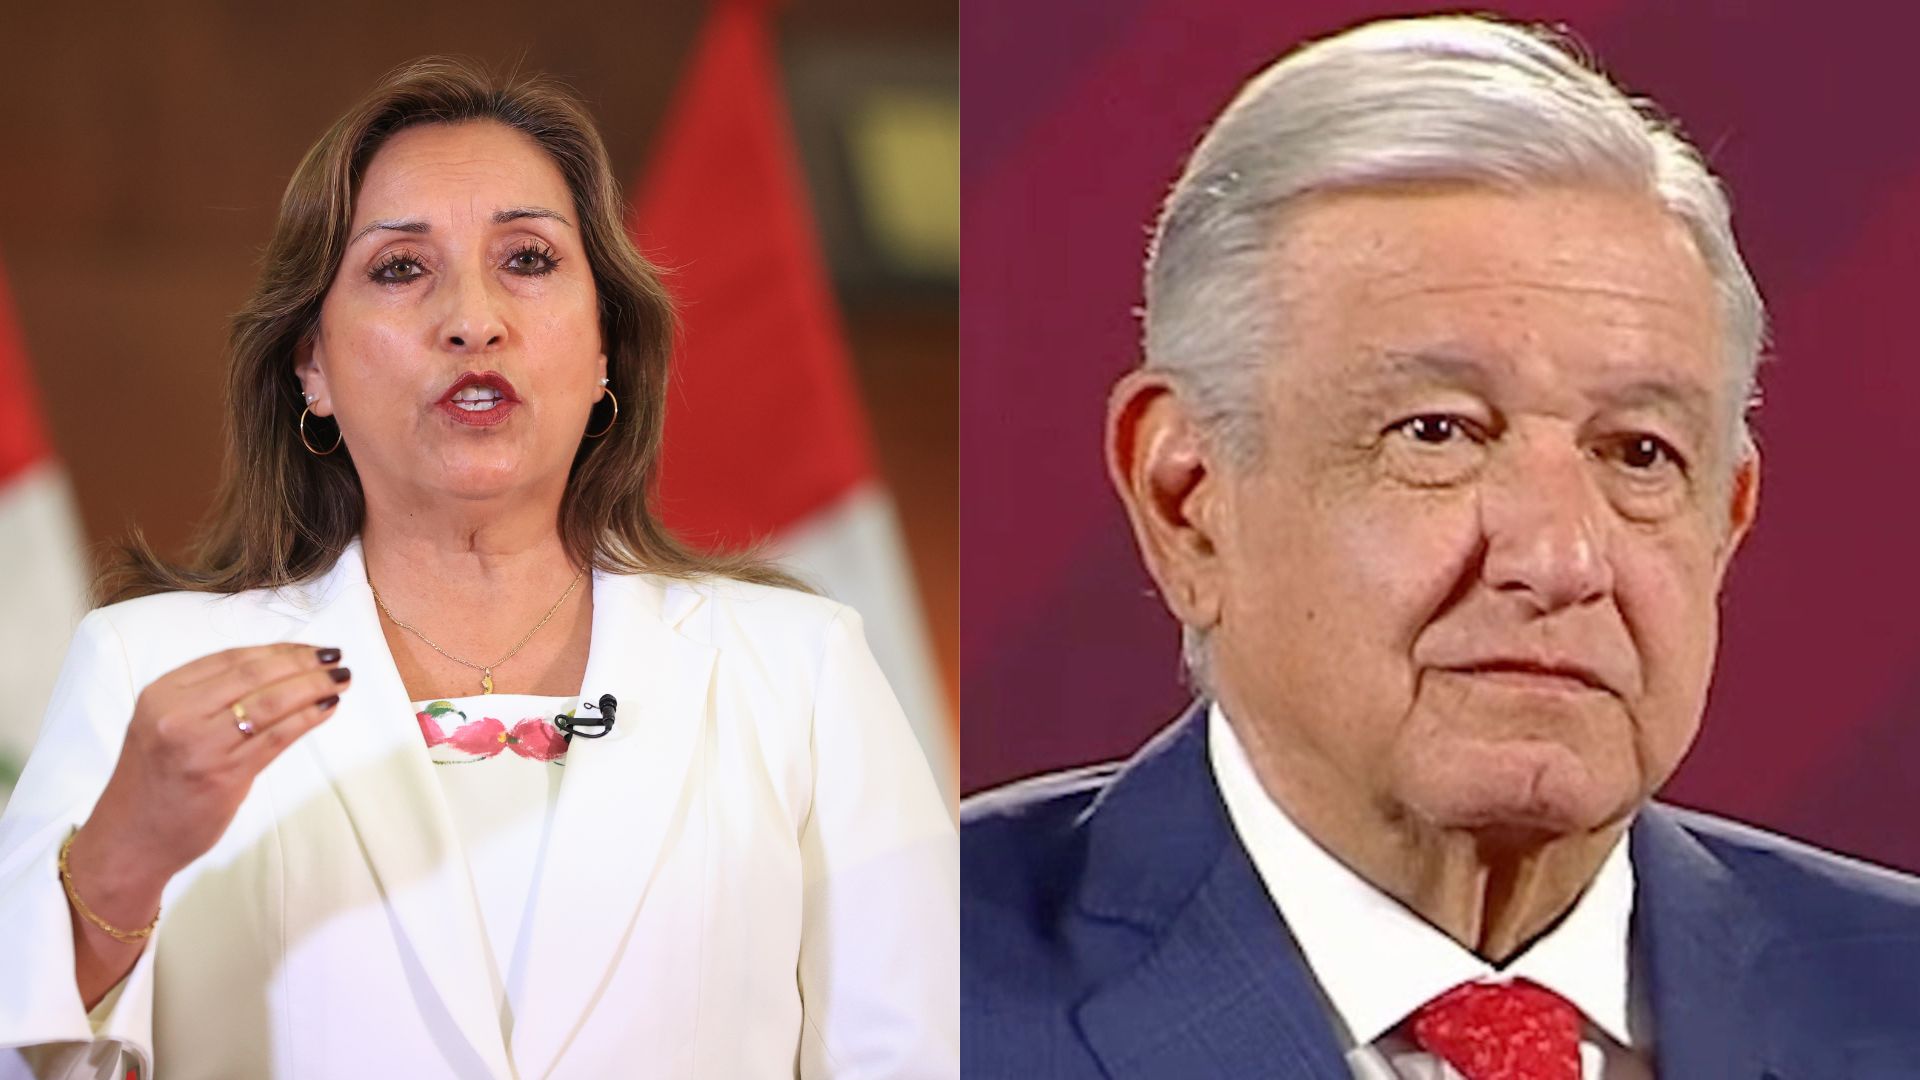 Chronology of the diplomatic crisis between Peru and Mexico